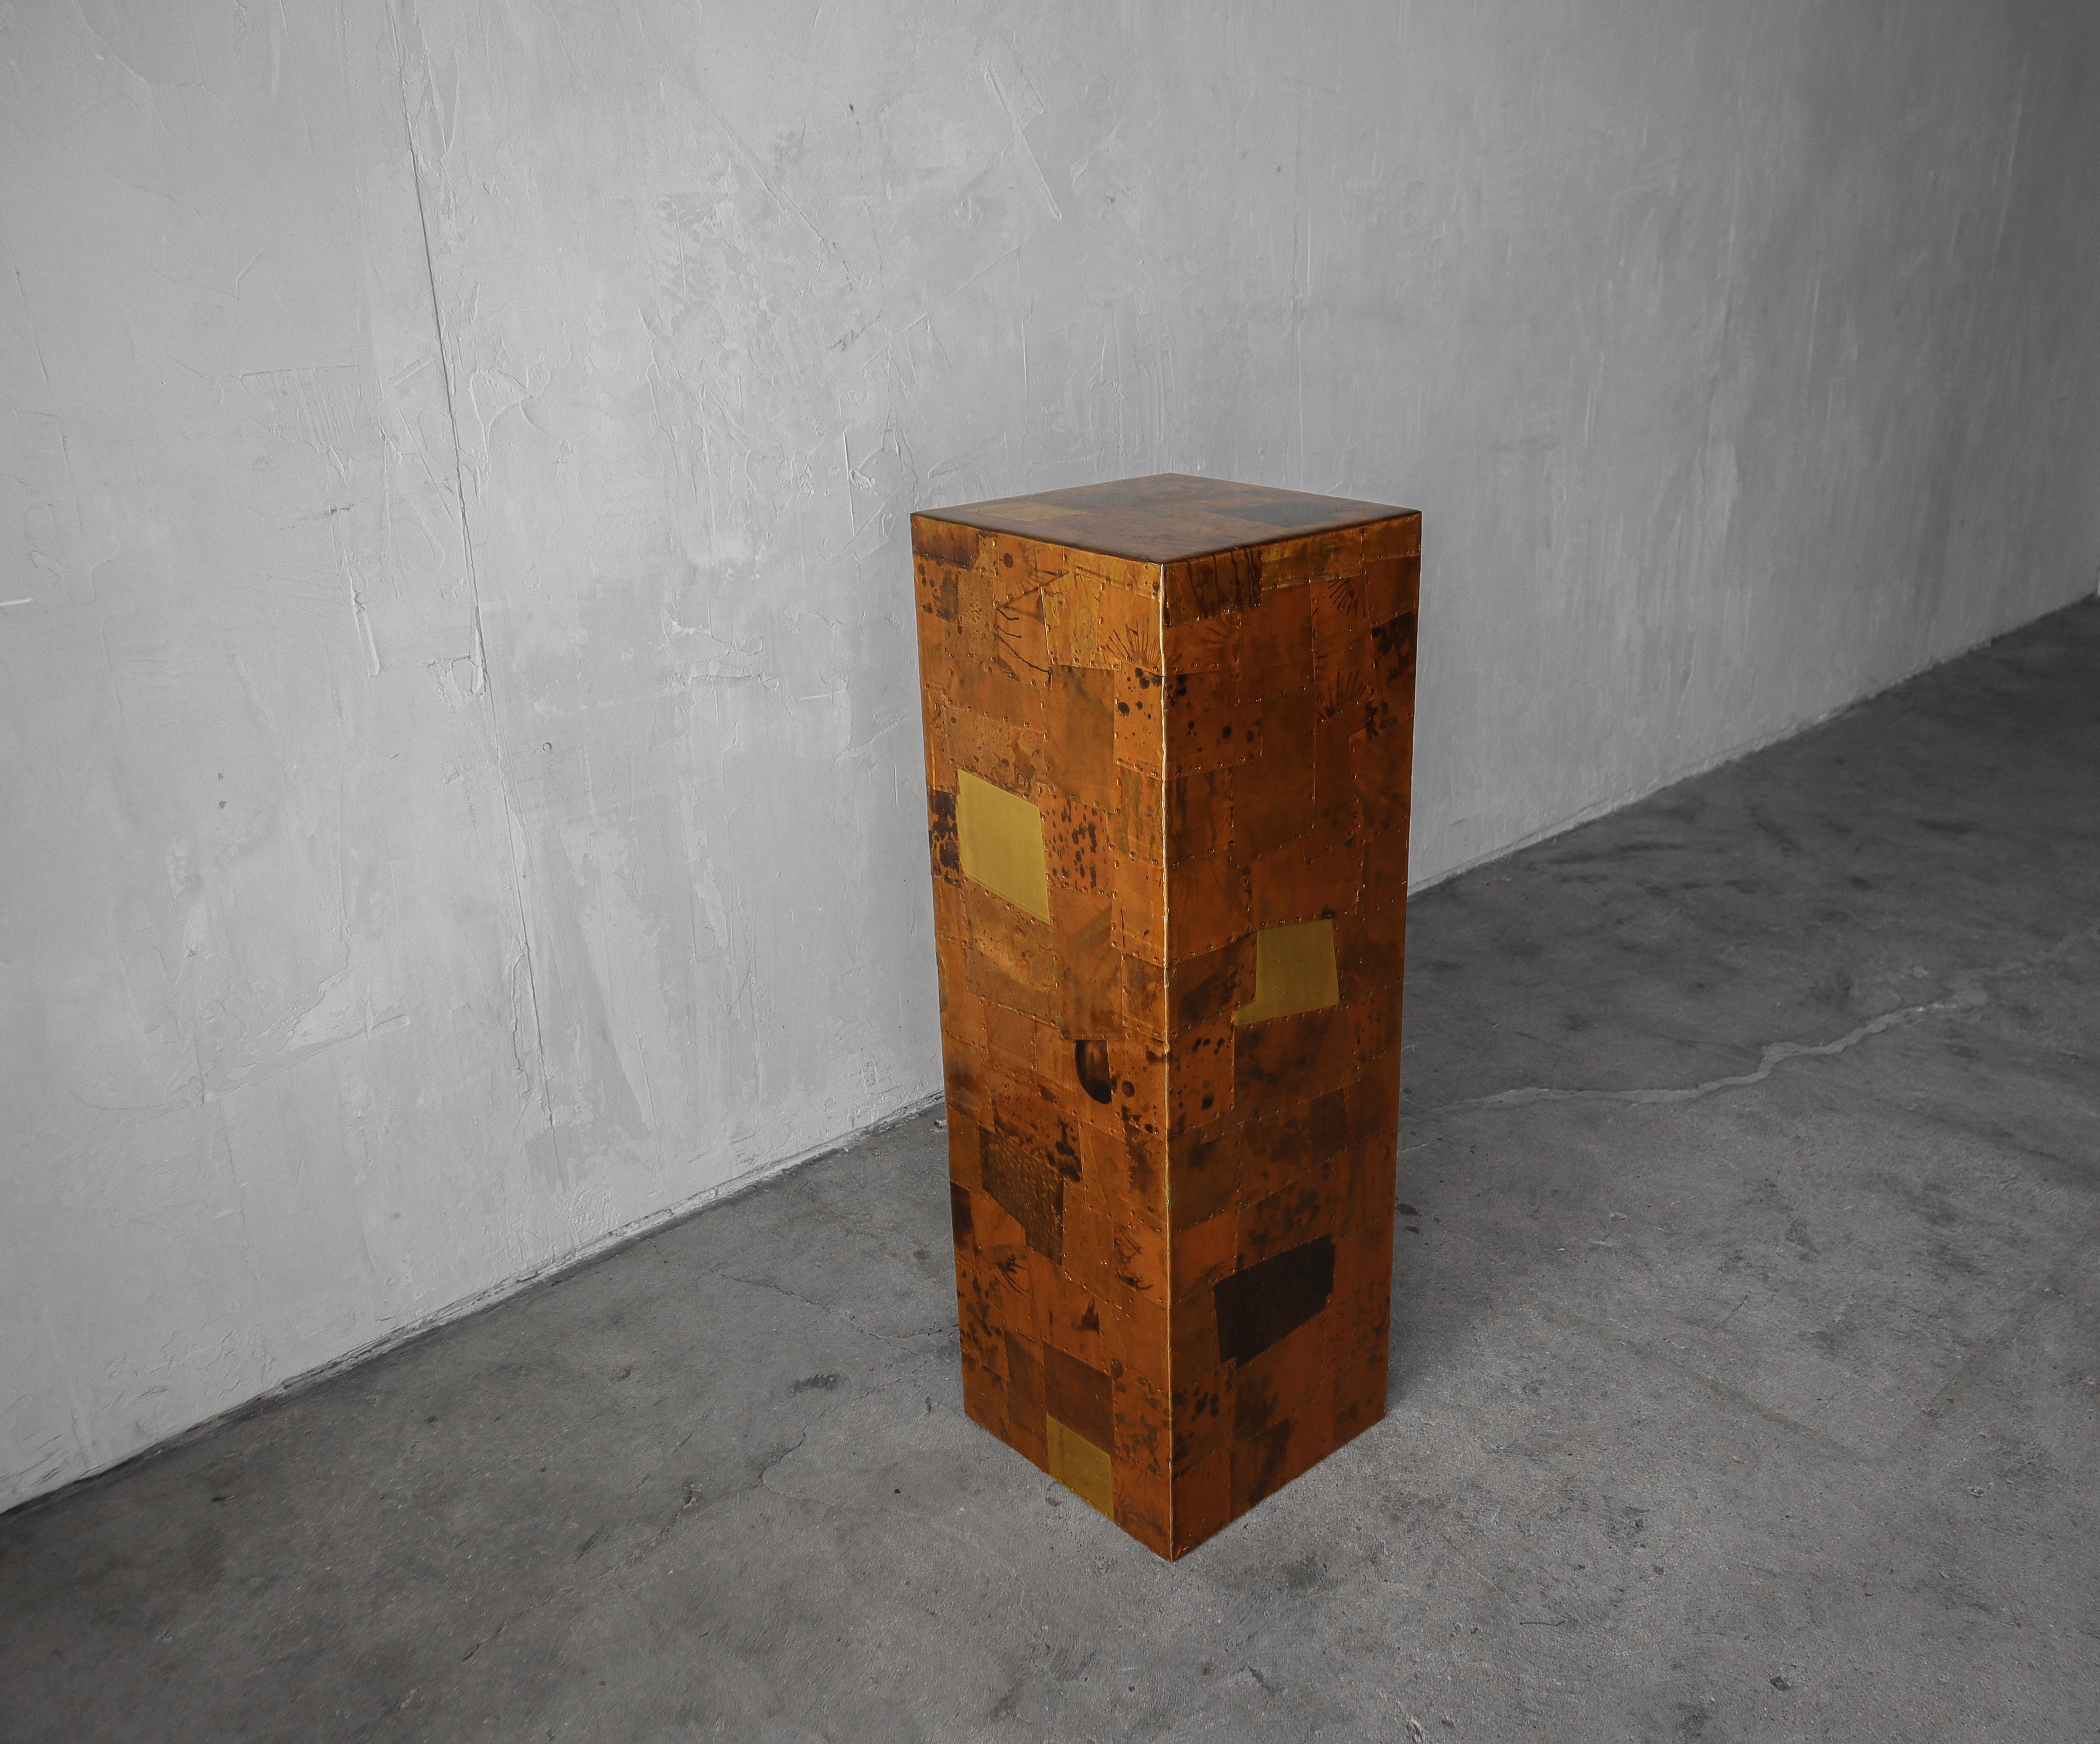 Great 1970s pedestal in lacquered patchwork copper by Brazilian furniture designer, Percival Lafer.

Pedestal is in great shape overall. The only imperfection to note is one small area of cracked lacquer at the base on one side. See last image.